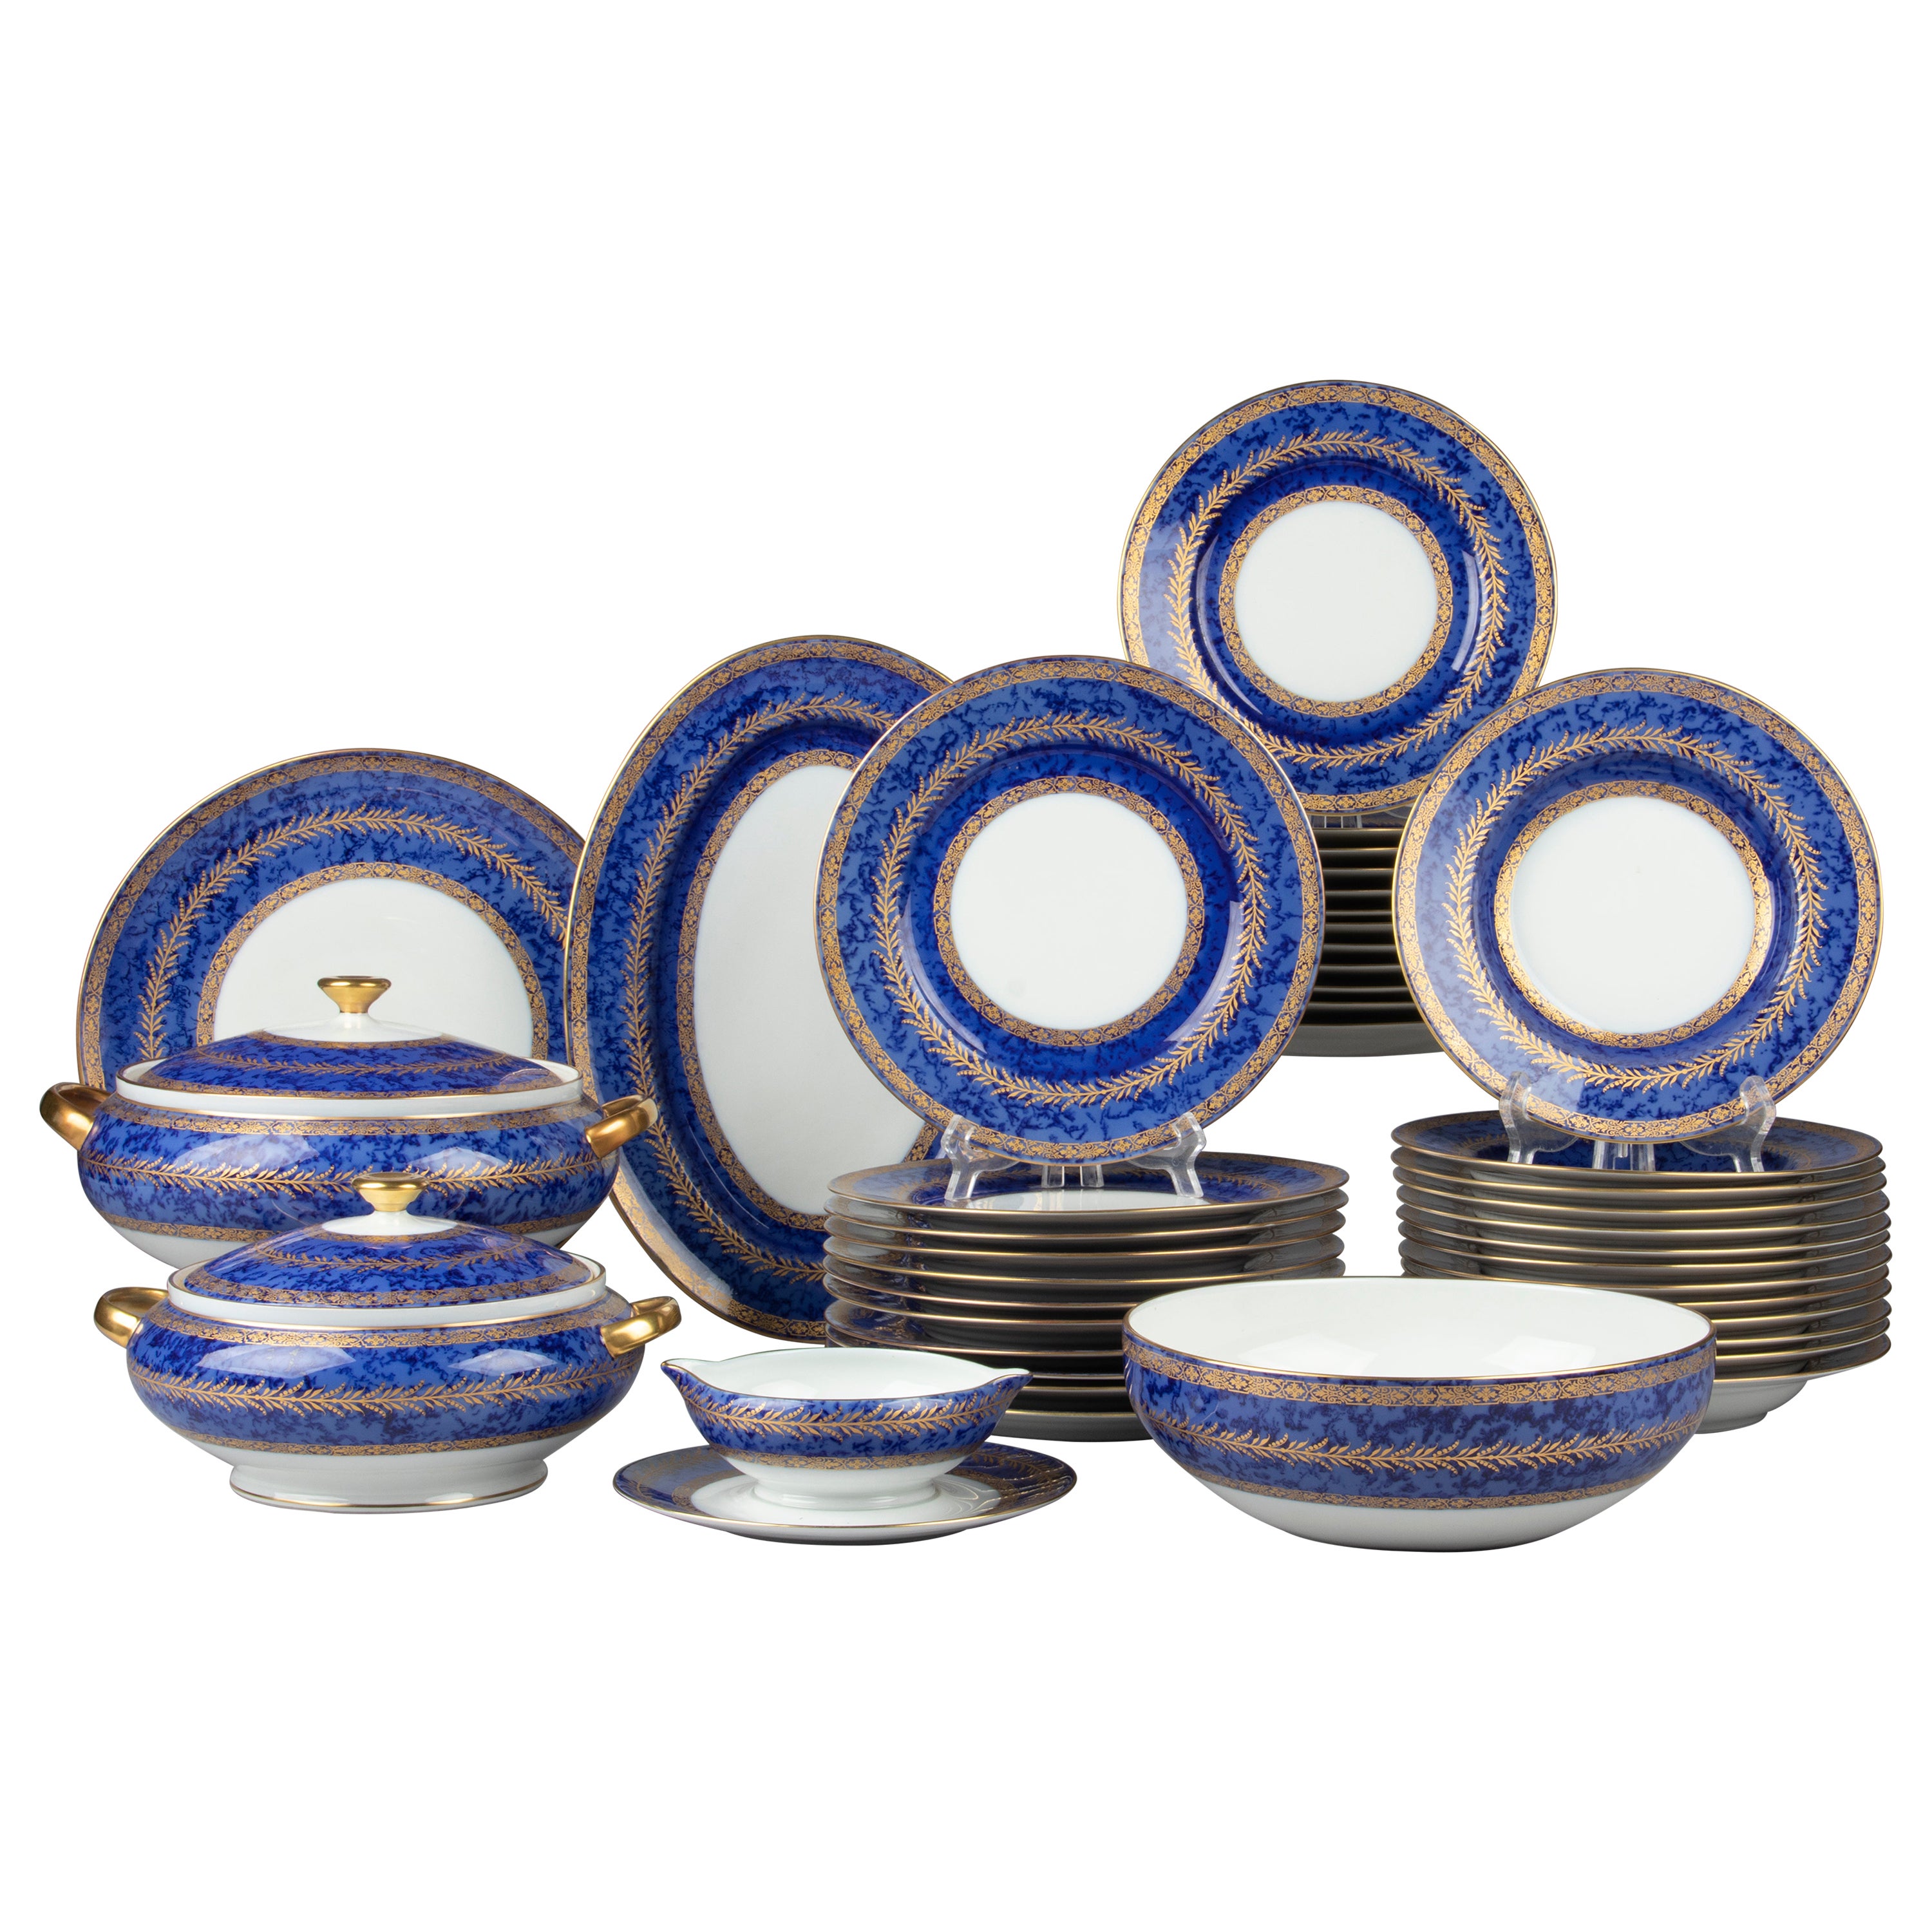 42-Piece set of Porcelain Tableware for 12 Persons made by Raynaud Limoges